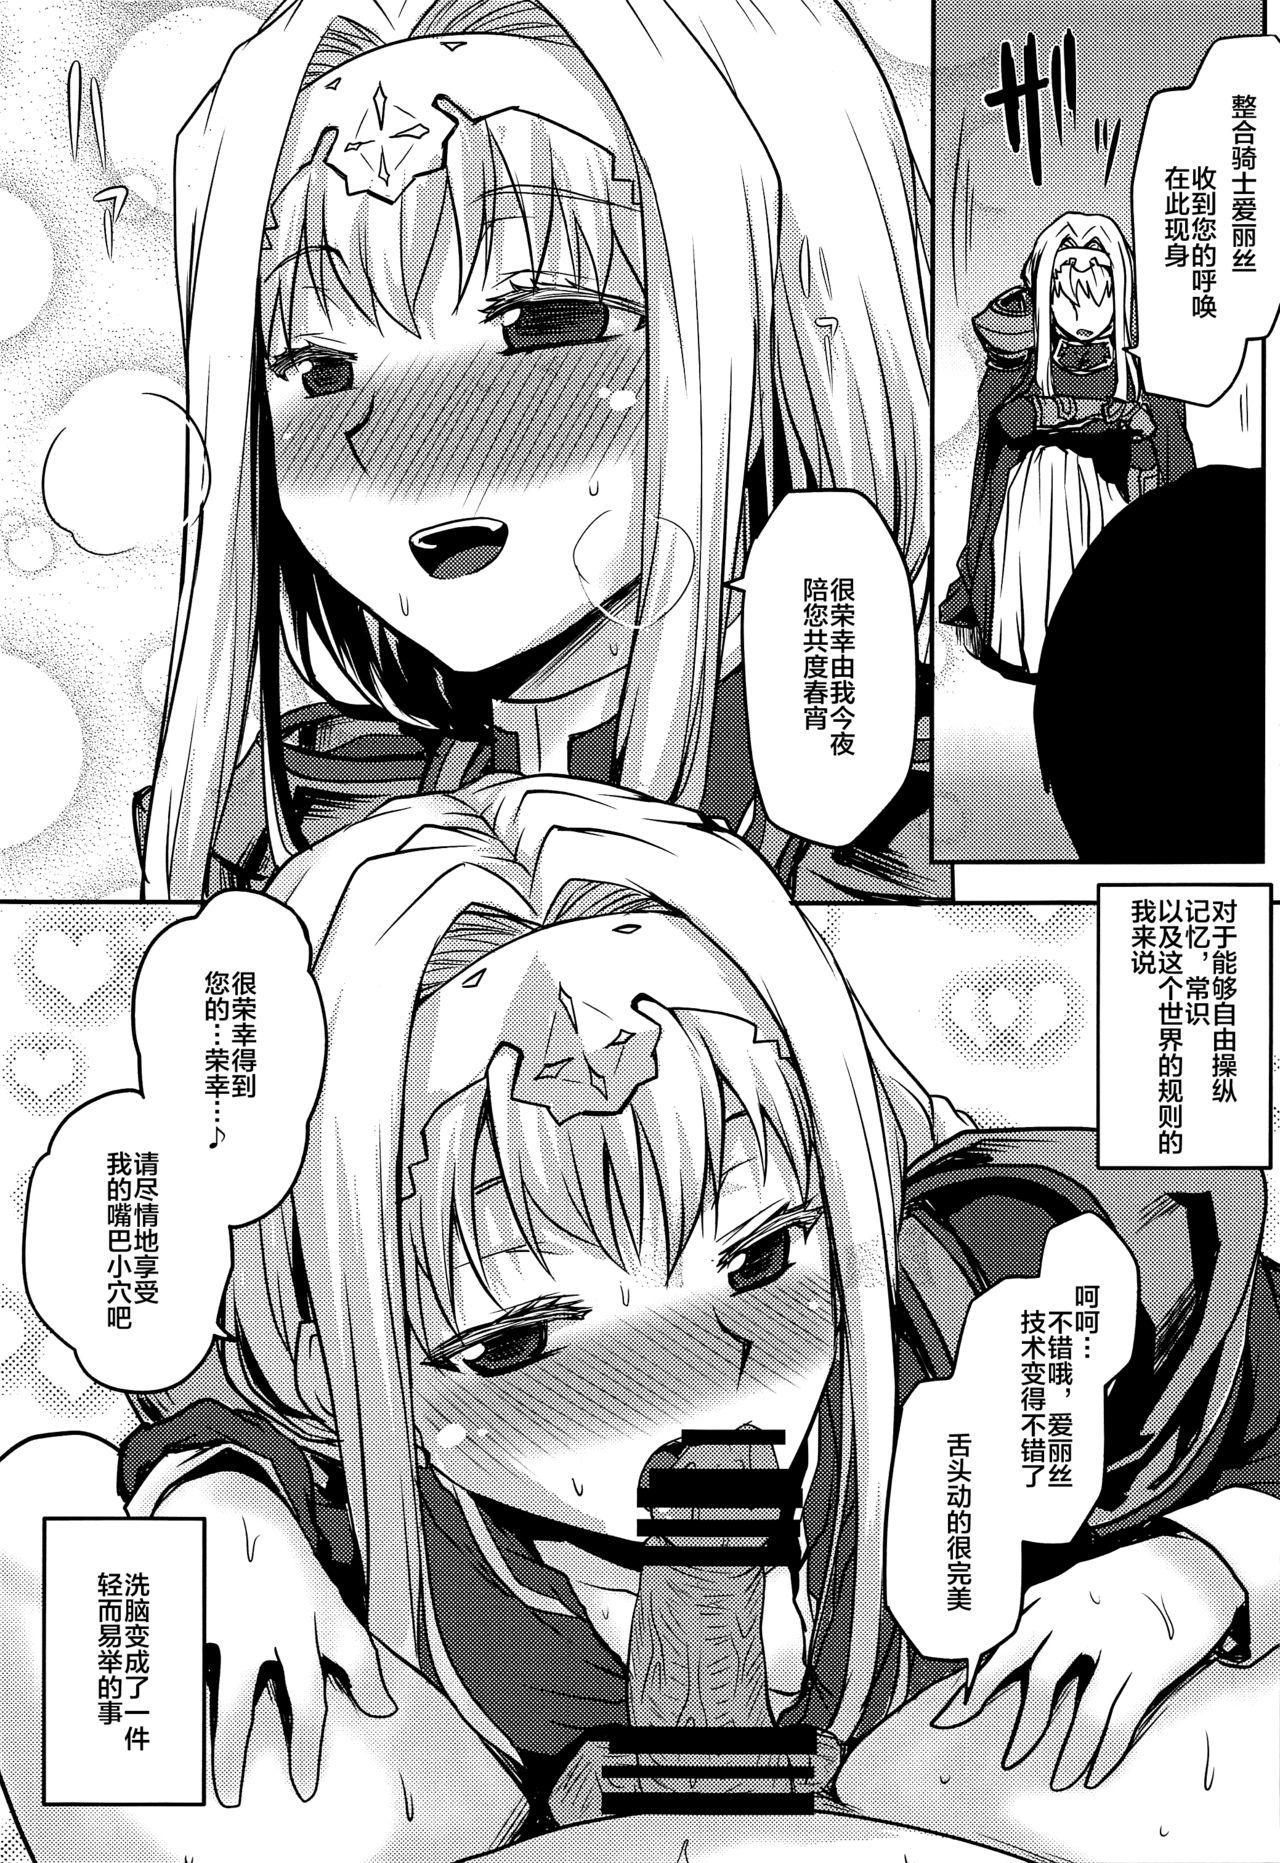 4some Omodume BOX 48 - Sword art online Squirt - Page 10